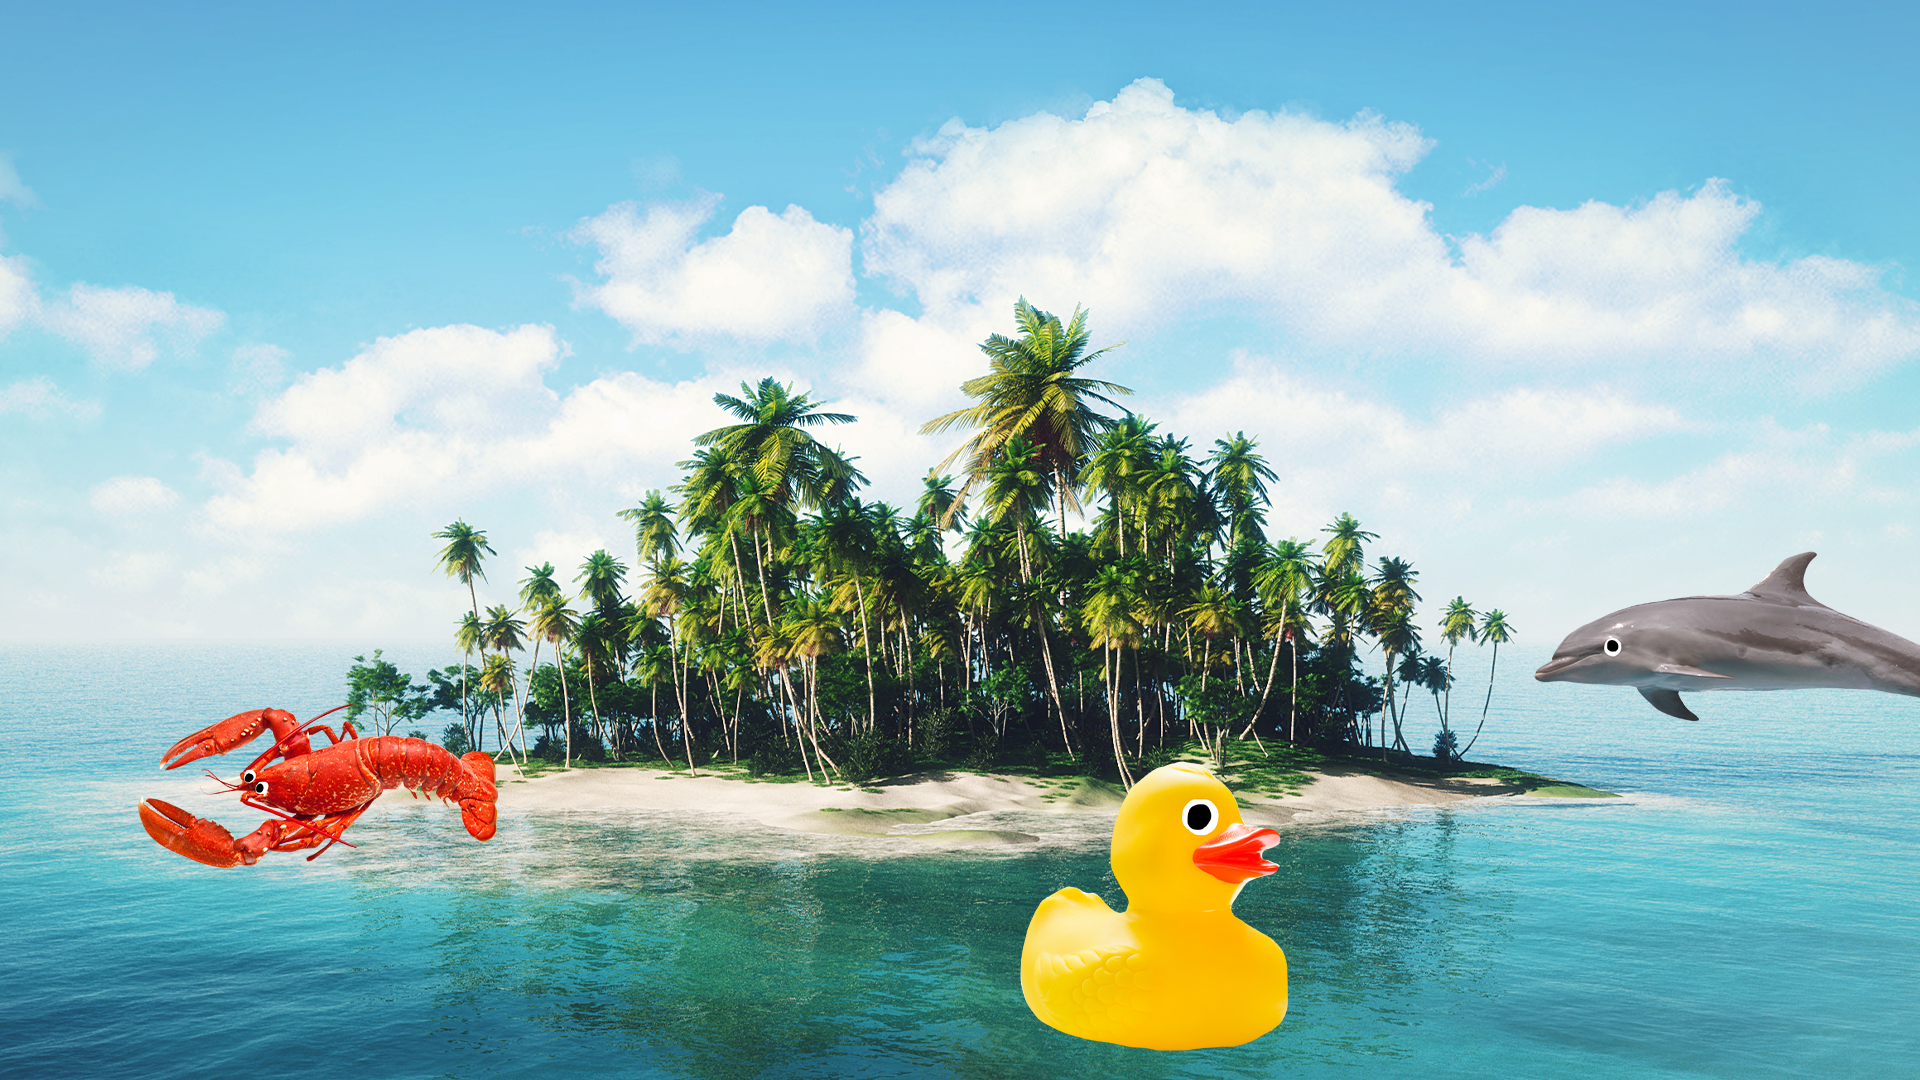 Tropical island with animals and rubber duck